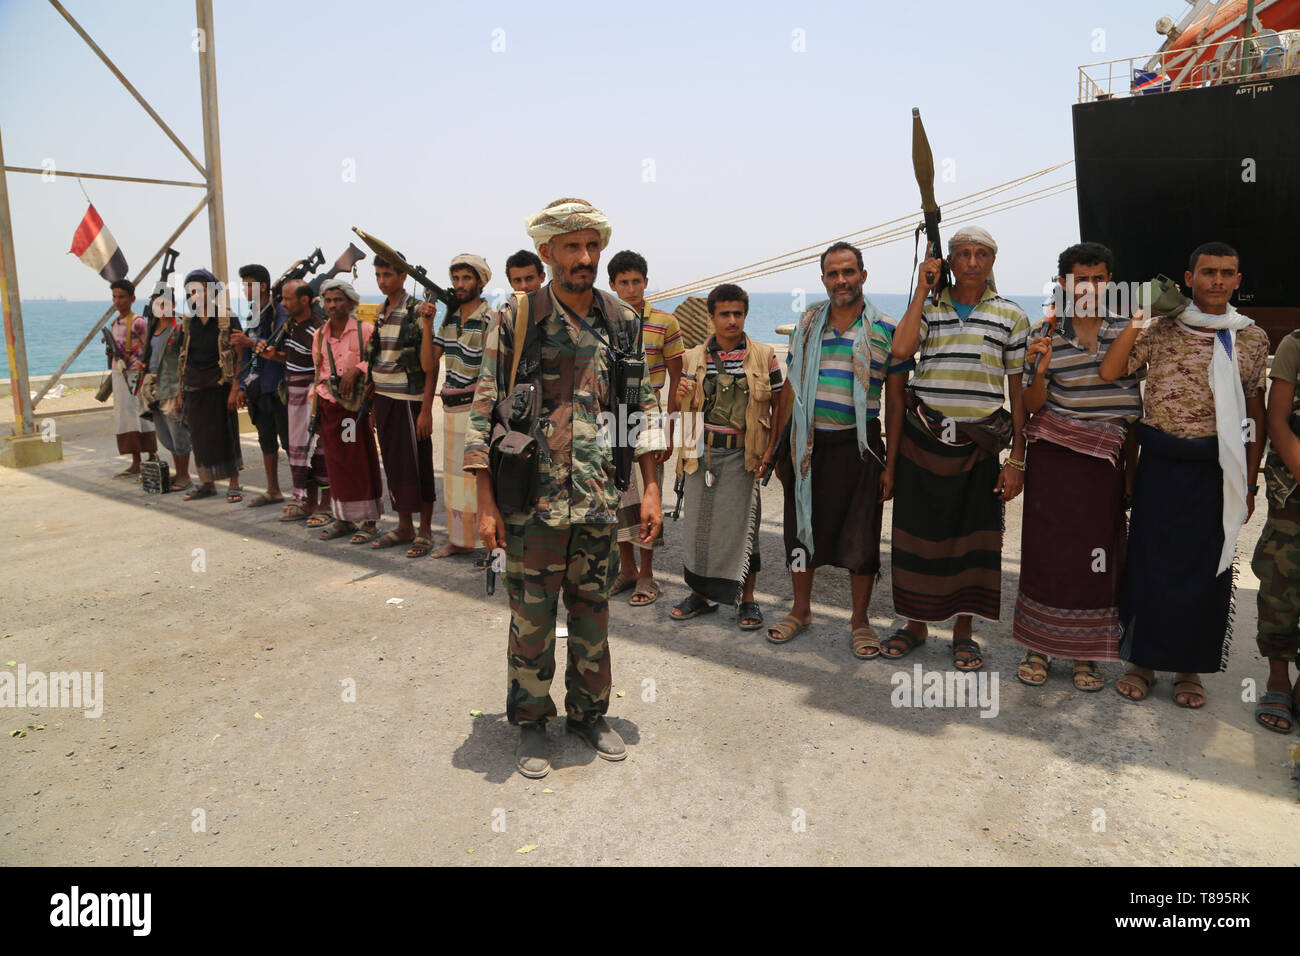 (190511) -- HODEIDAH (YEMEN), May 11, 2019 (Xinhua) -- Houthi members are seen during their withdrawal from Salif port in Hodeidah, Yemen, on May 11, 2019. Yemen's Houthi rebels began on Saturday withdrawal from two ports of Hodeidah Province, eyewitnesses said. (Xinhua) Stock Photo